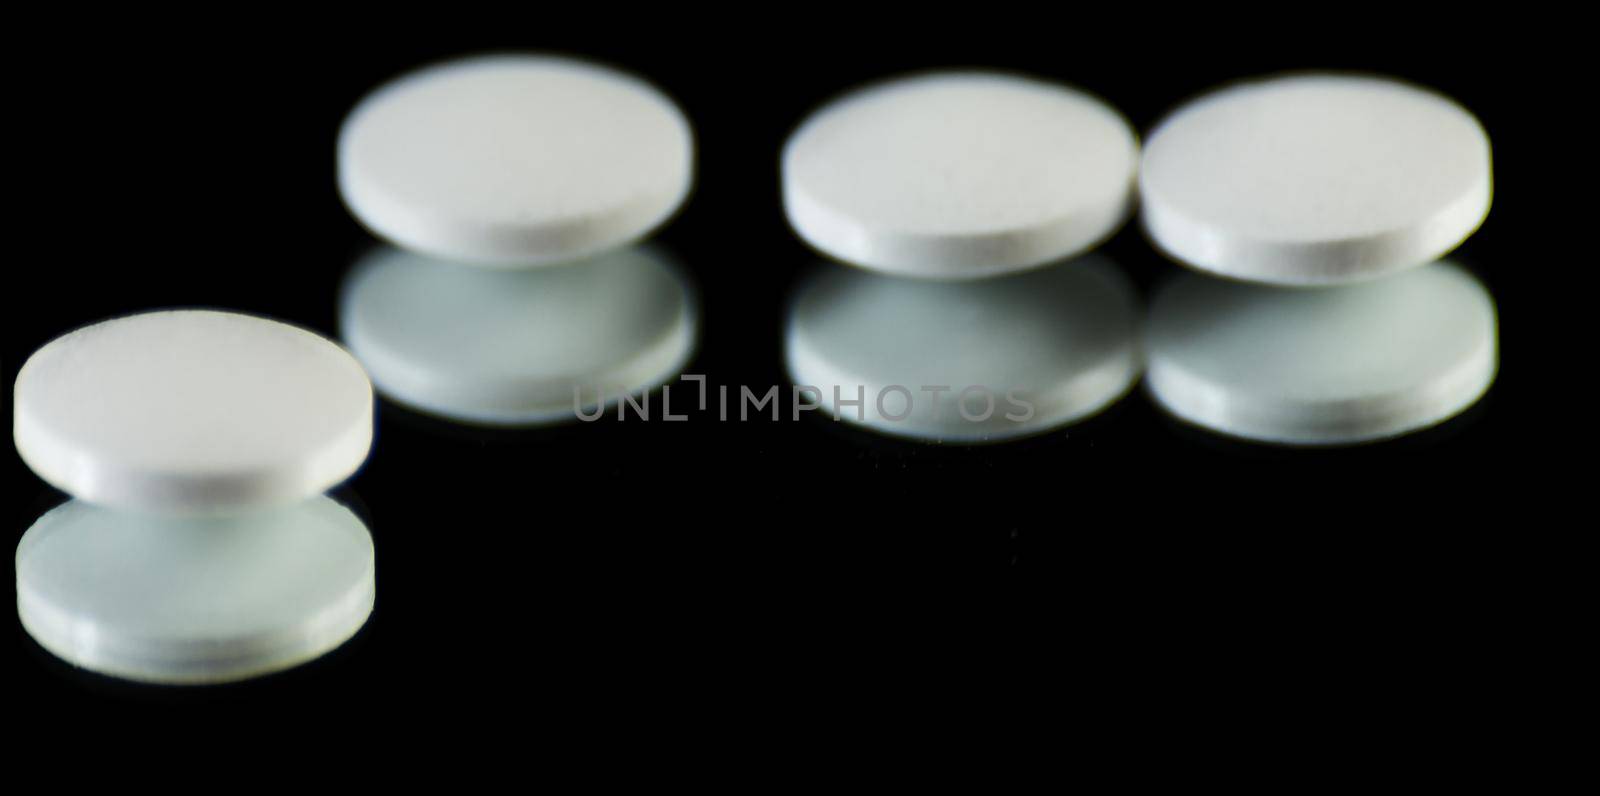 scattered tablets on a black background, pills reflected in the mirror, medicine